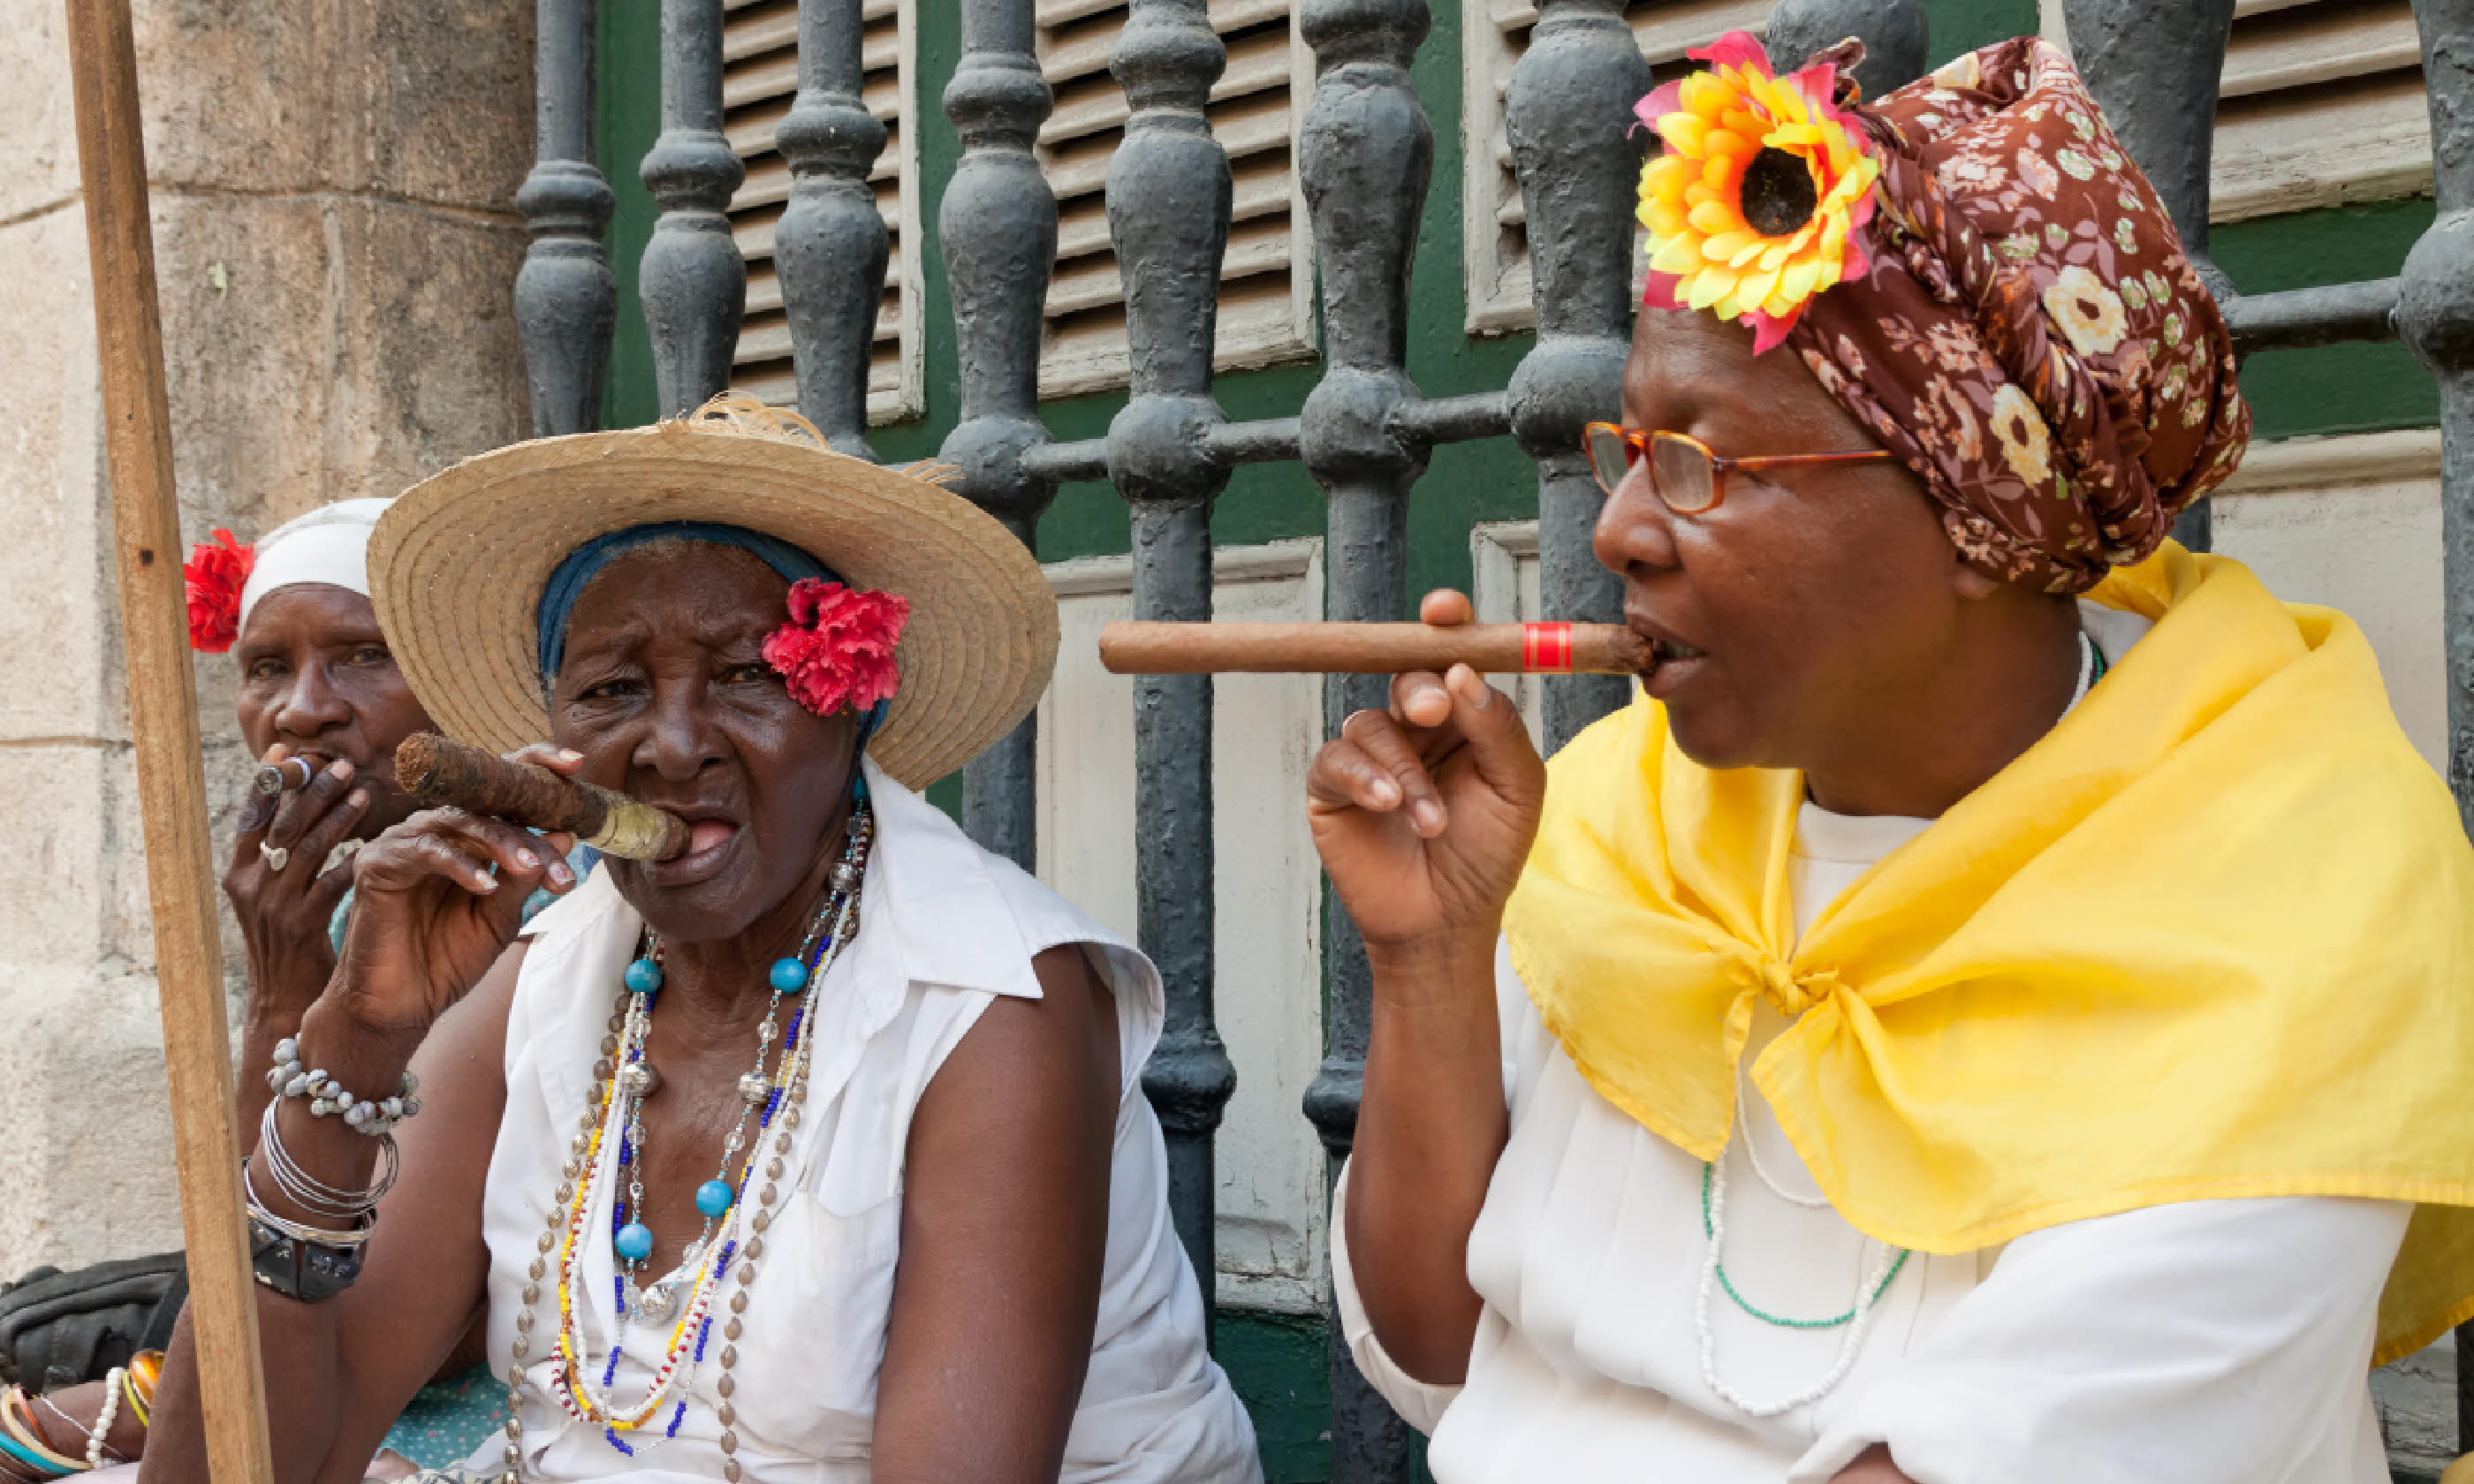 Old ladies with Cuban cigars: soon to be a thing of the past? (Shutterstock)